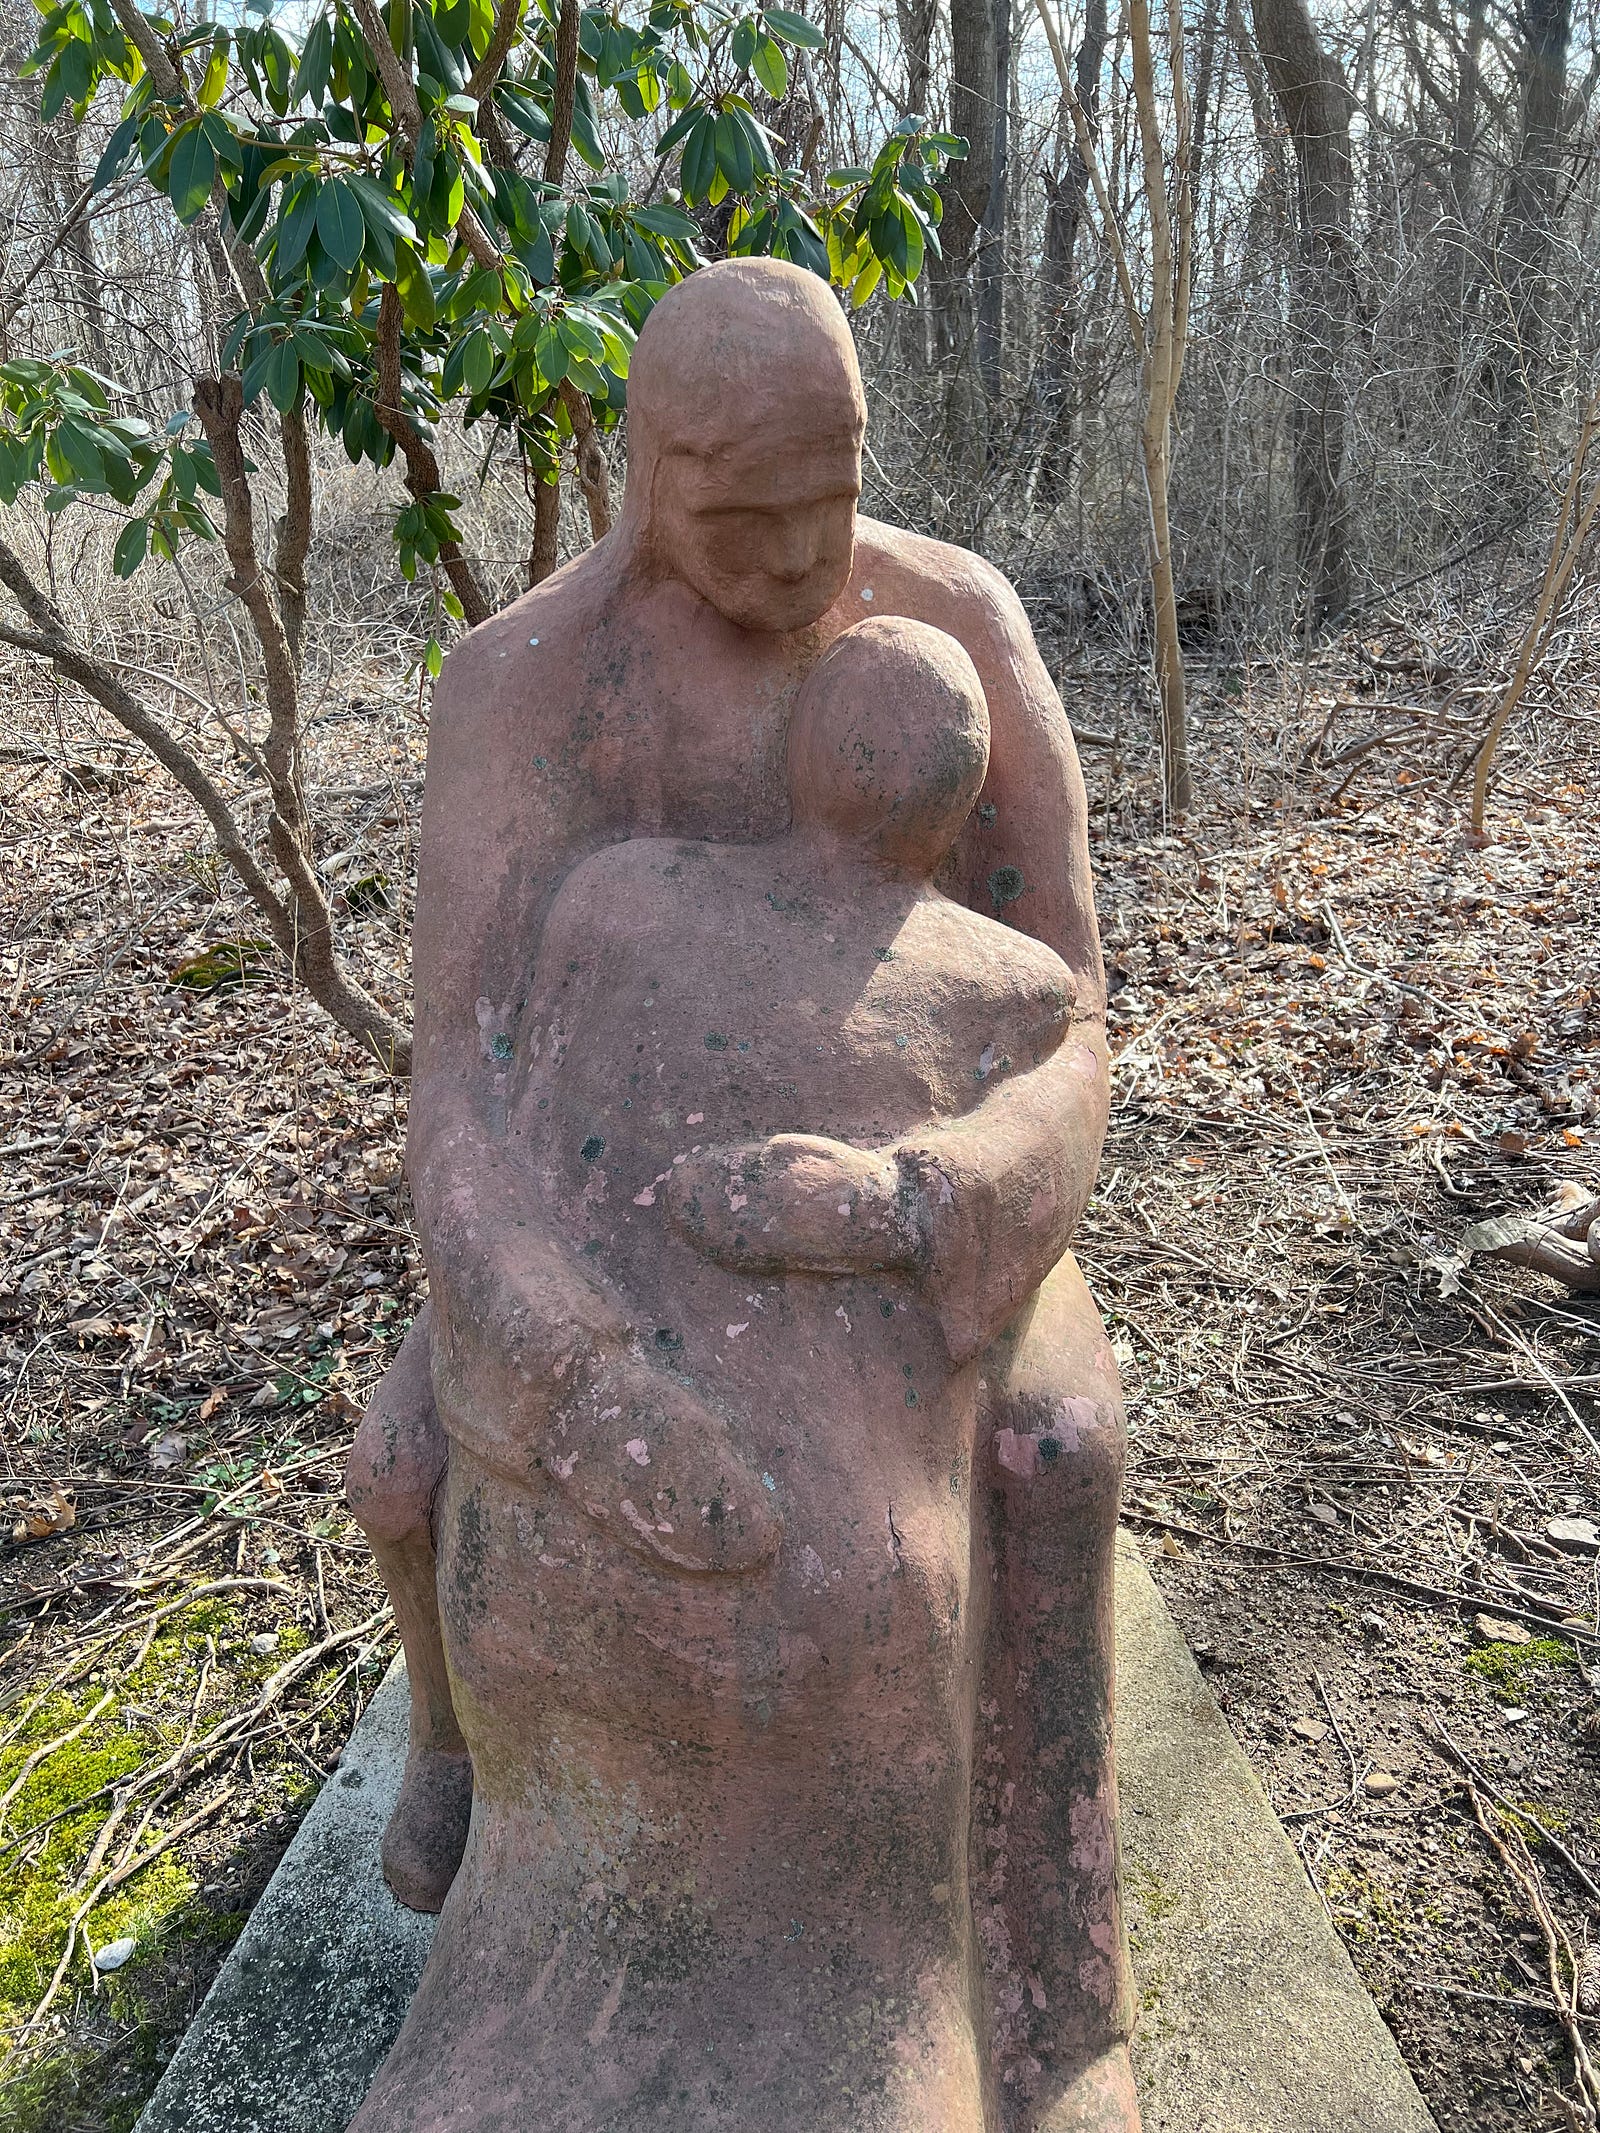 Statue of the father embracing the prodigal son in an outdoor garden.